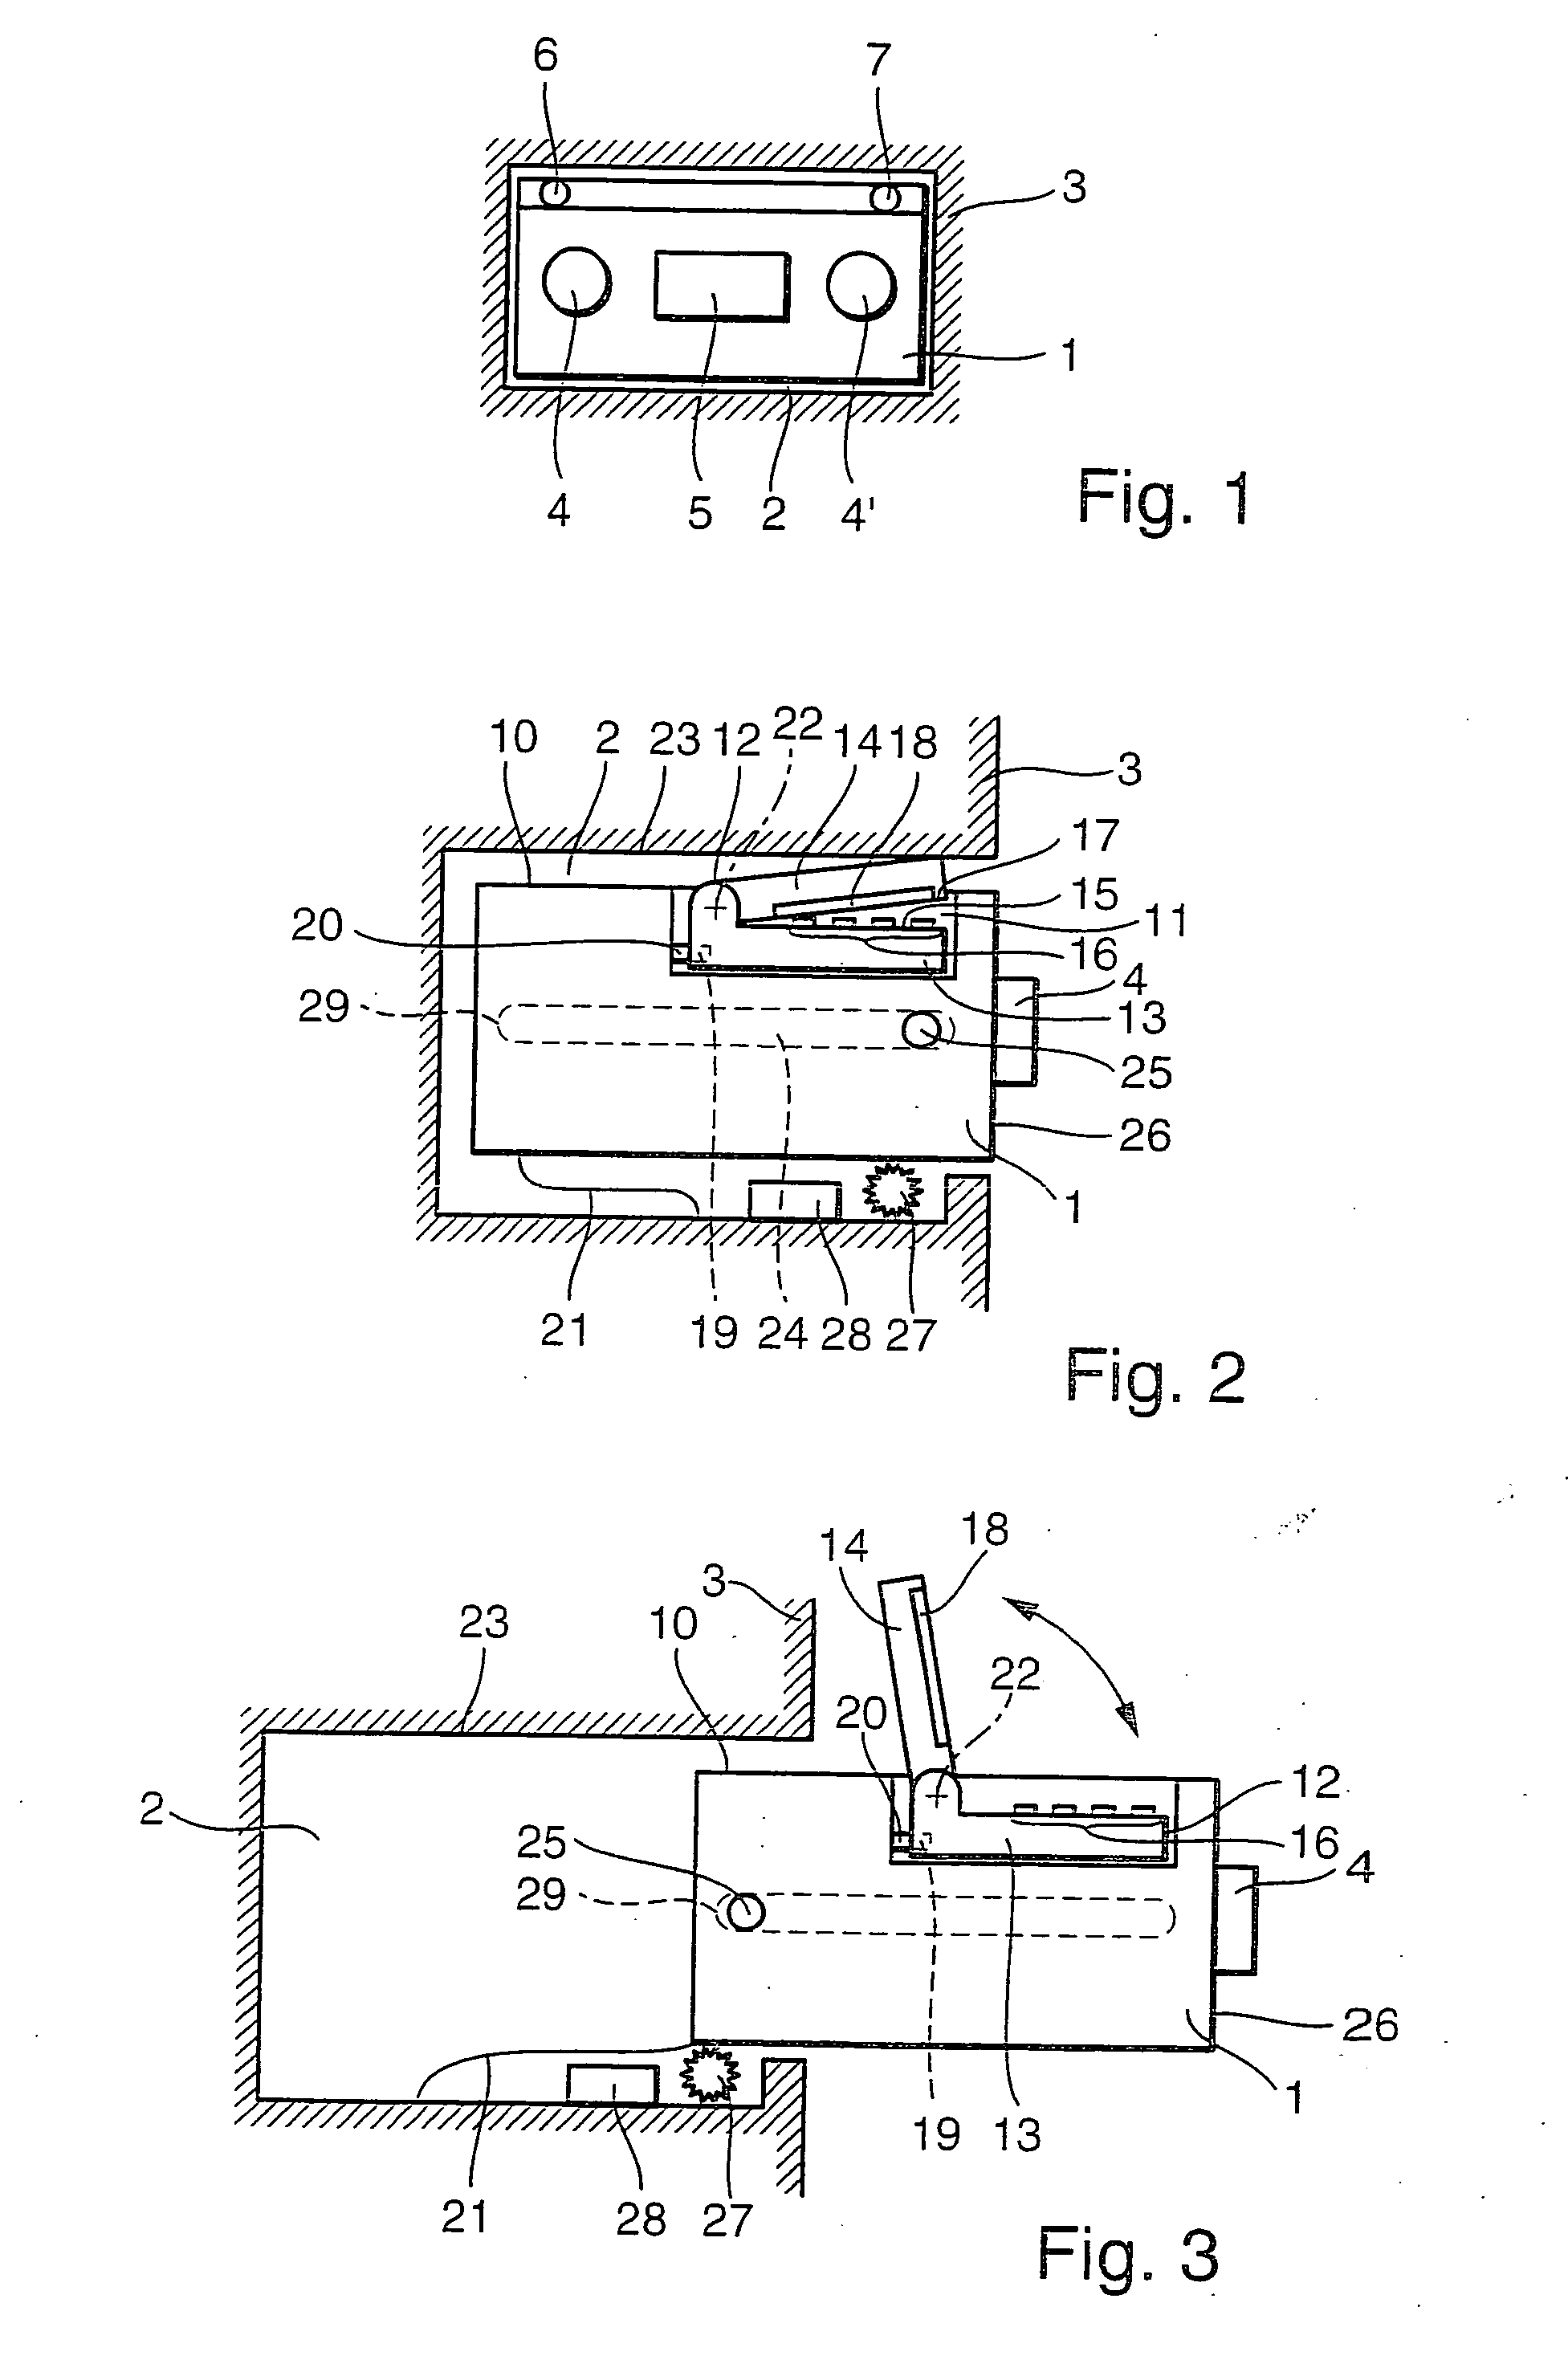 Retaining element for a portable computer device